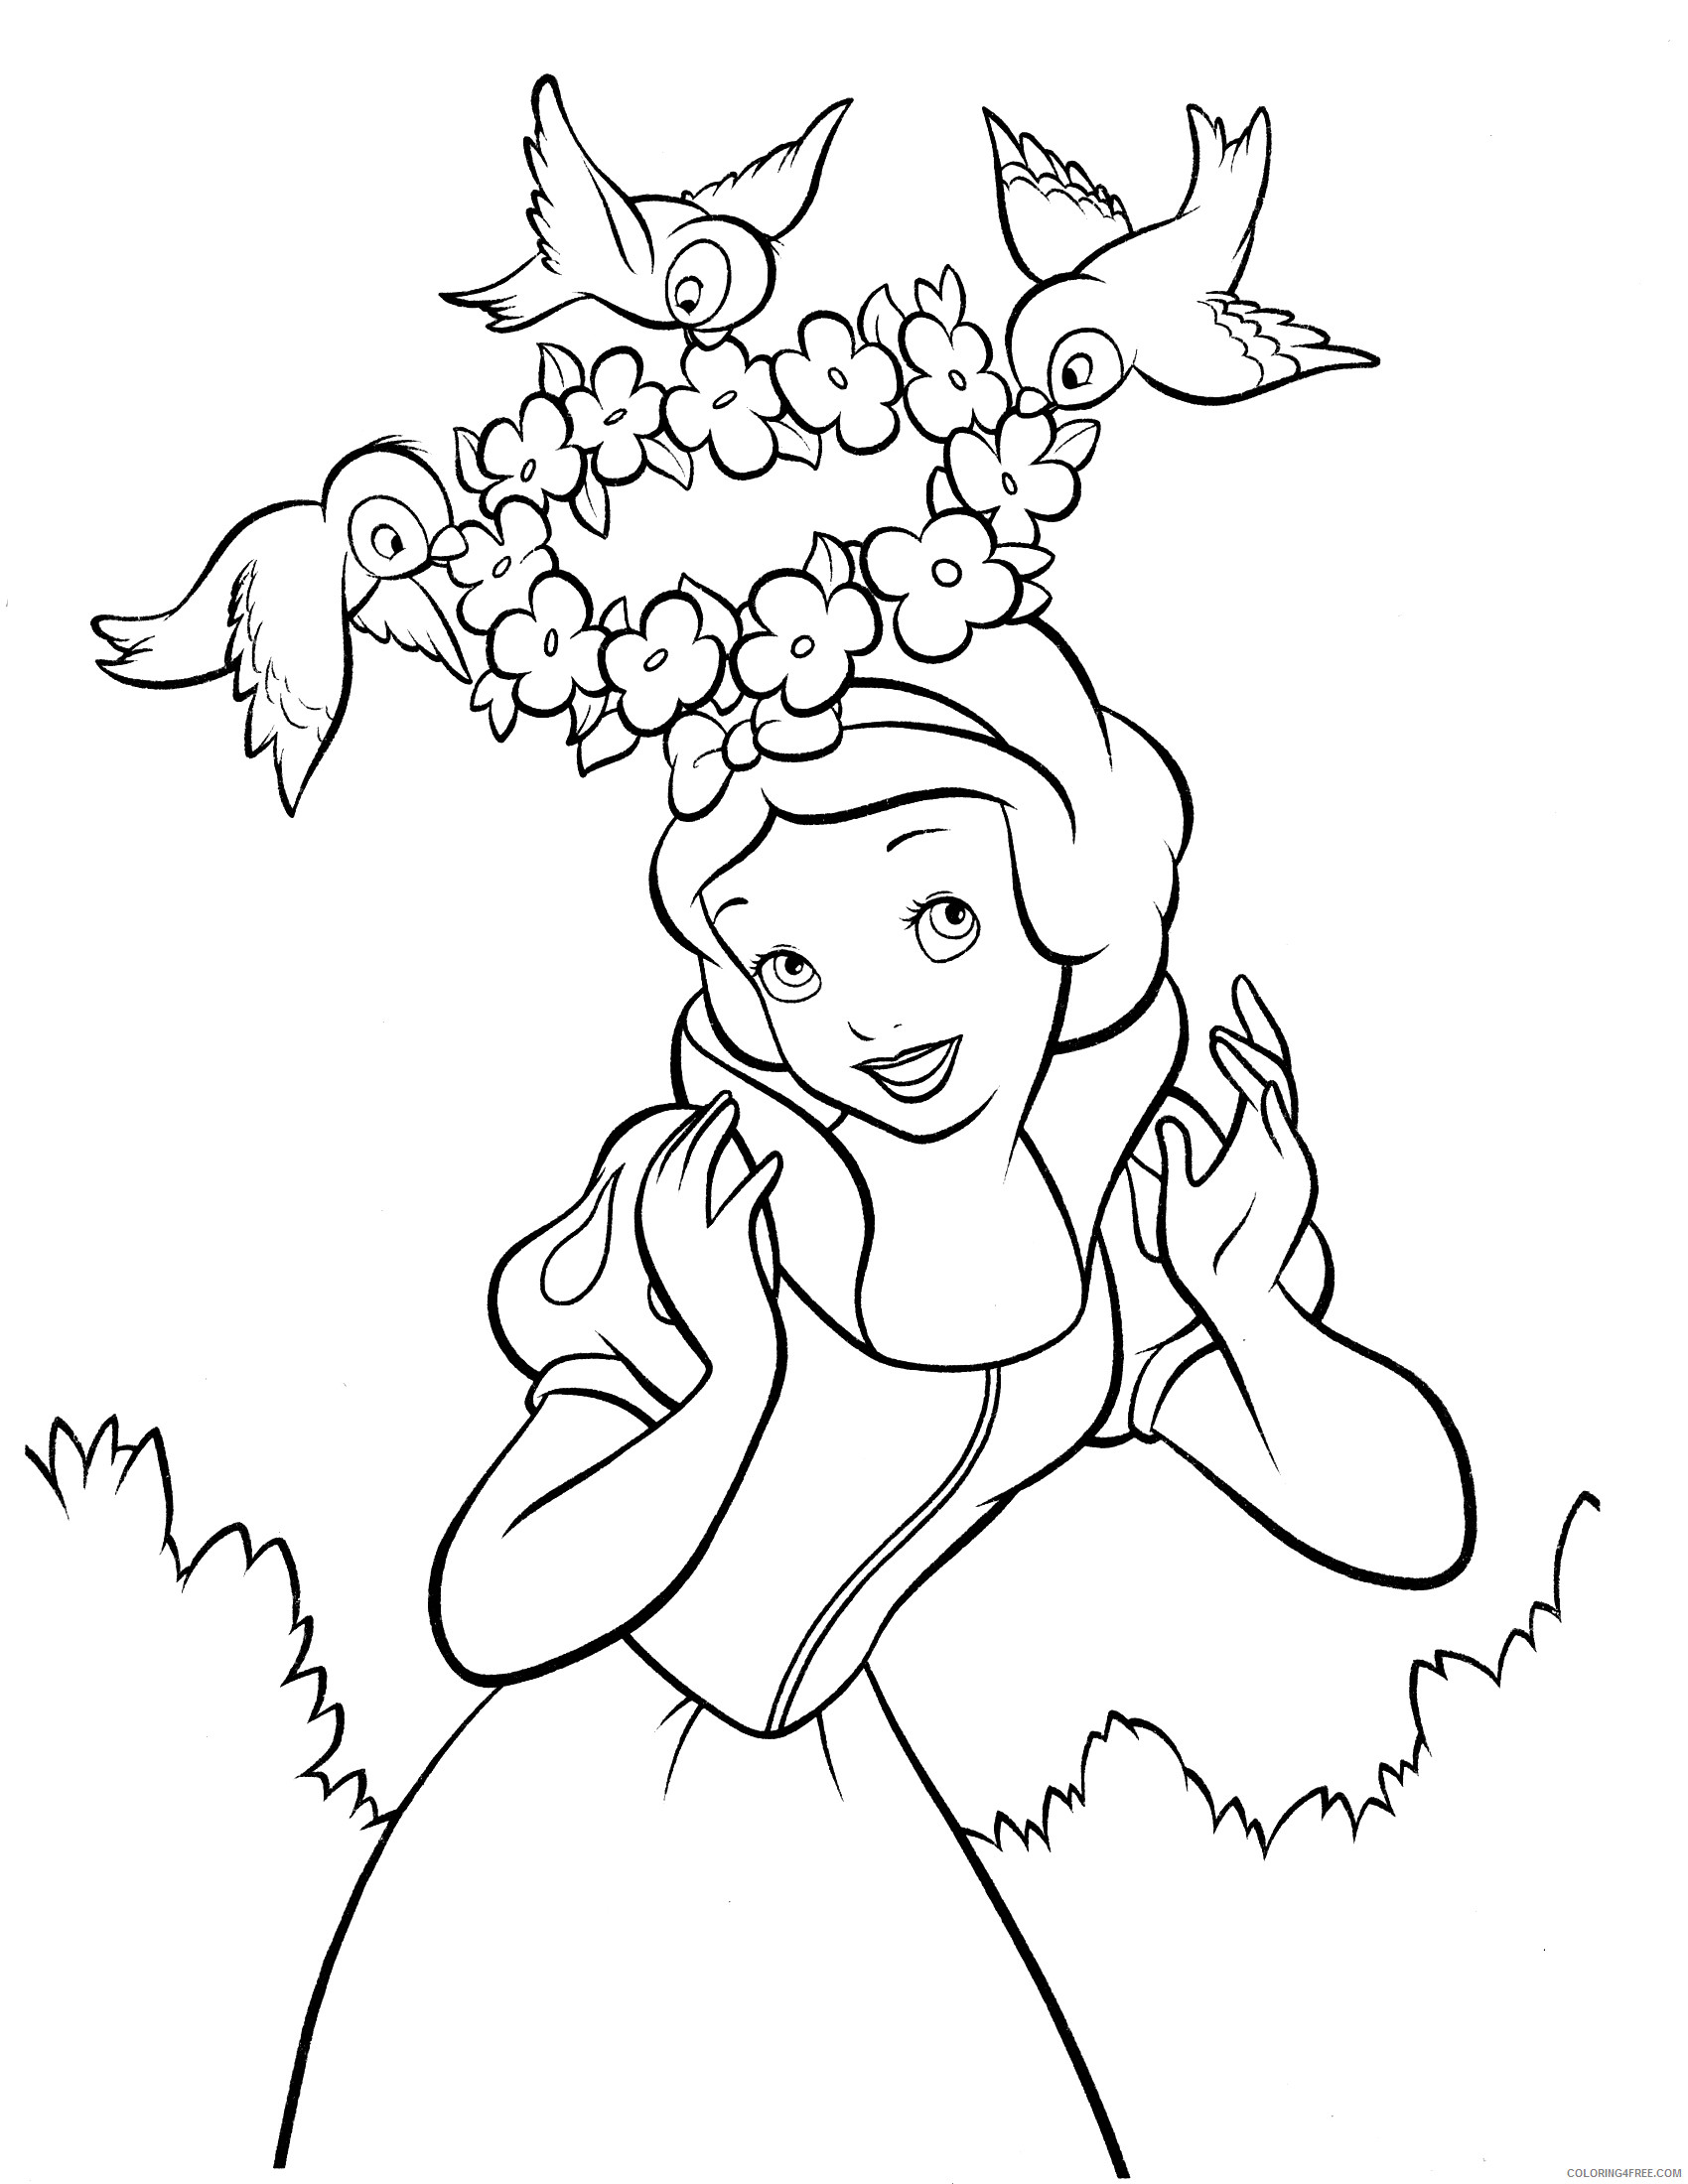 Snow White Coloring Pages Cartoons Free Snow White Printable 2020 5713 Coloring4free